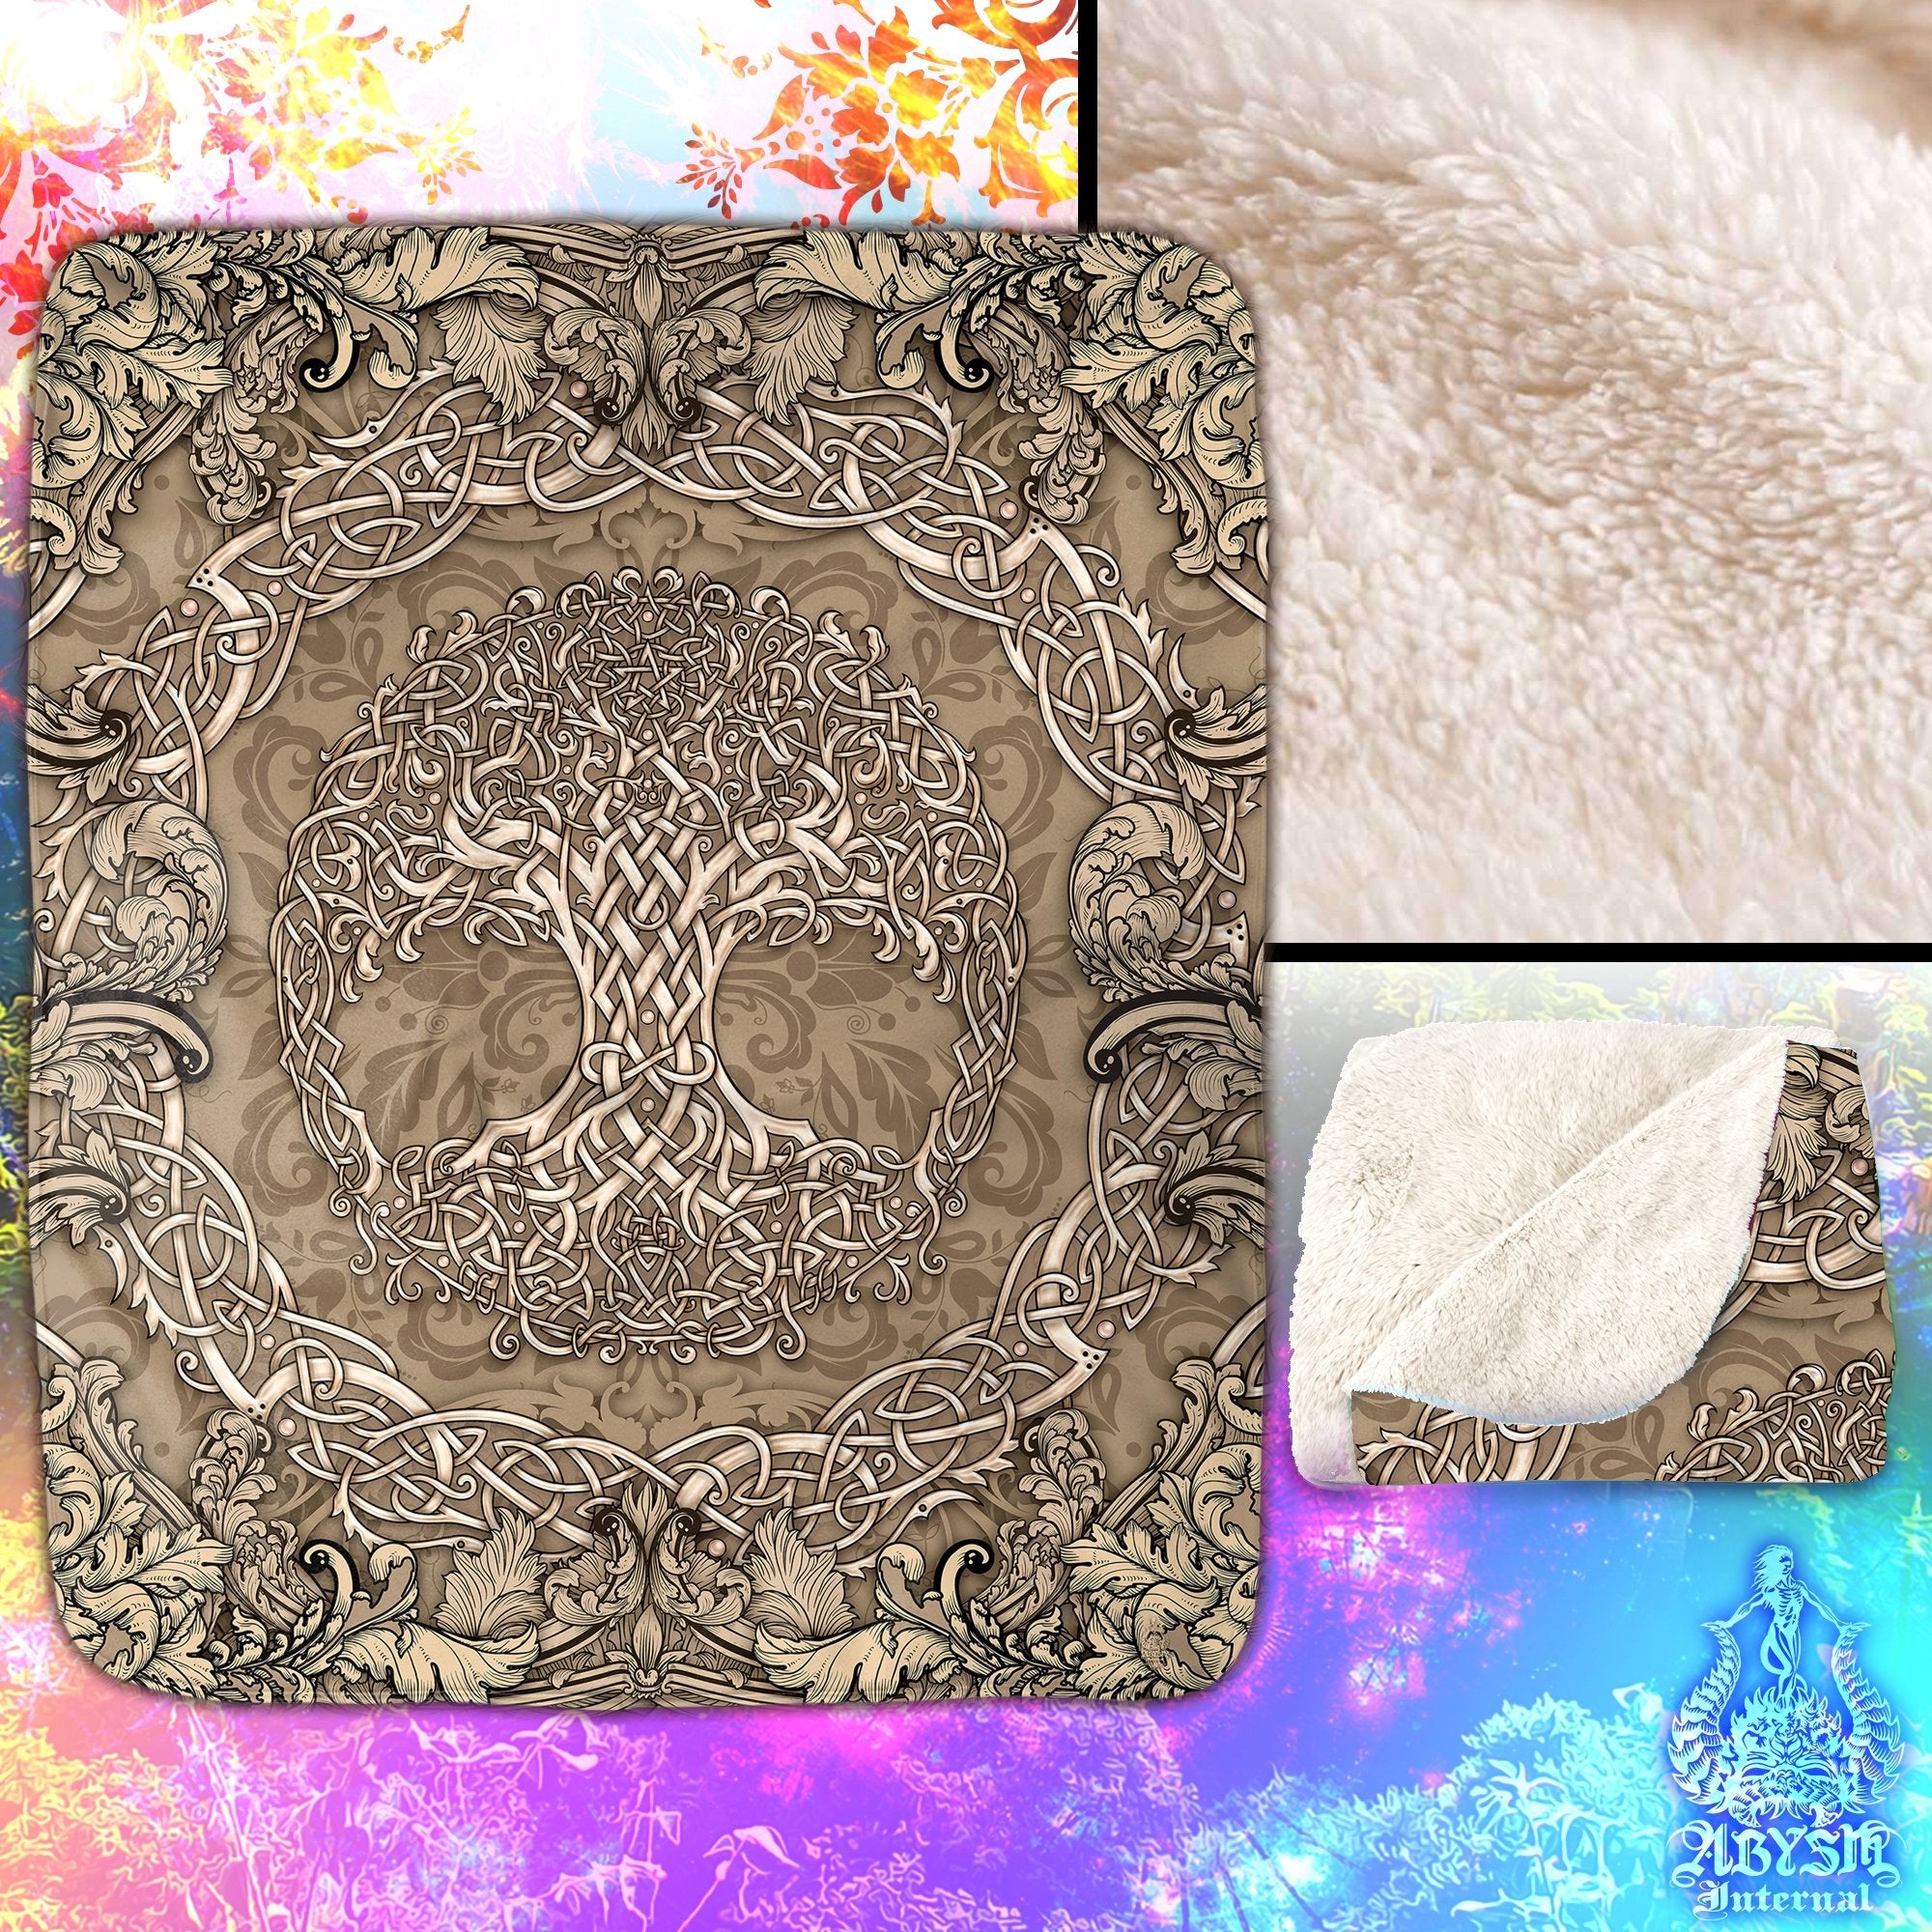 Tree of Life Throw Fleece Blanket, Pagan Decor, Celtic Knot, Witch Room, Wicca, Eclectic and Funky Gift - Cream - Abysm Internal